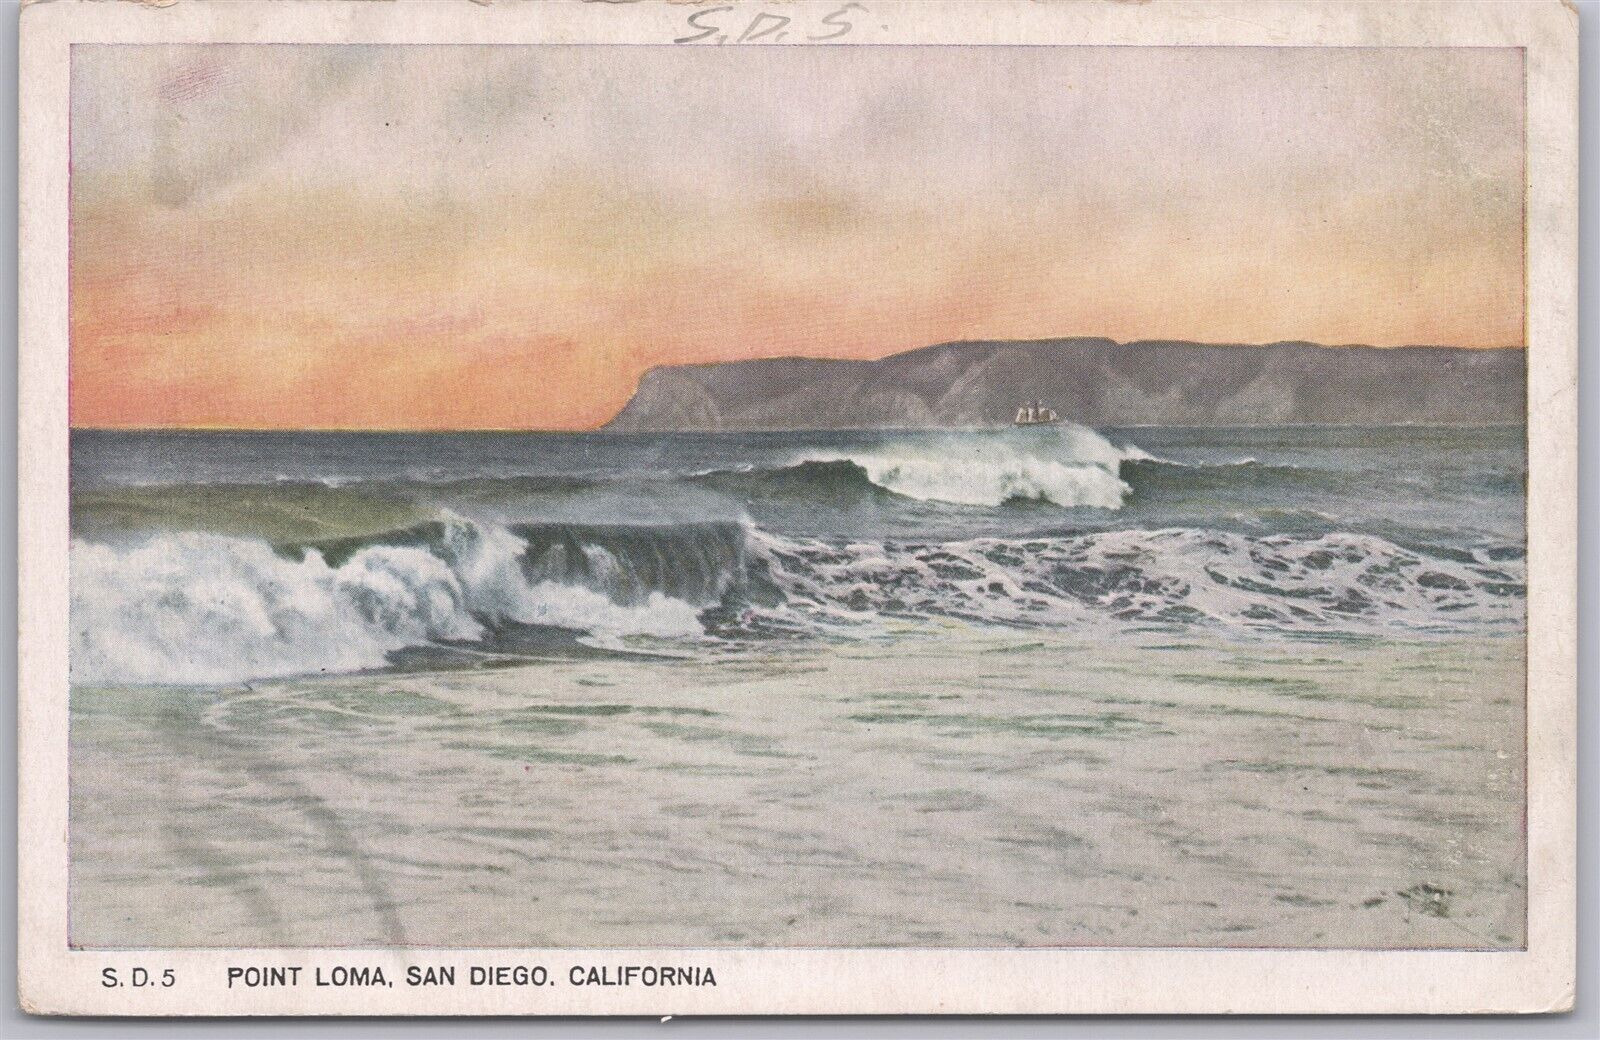 San Diego, Cal., Point Loma, The surf crashing over the rocks